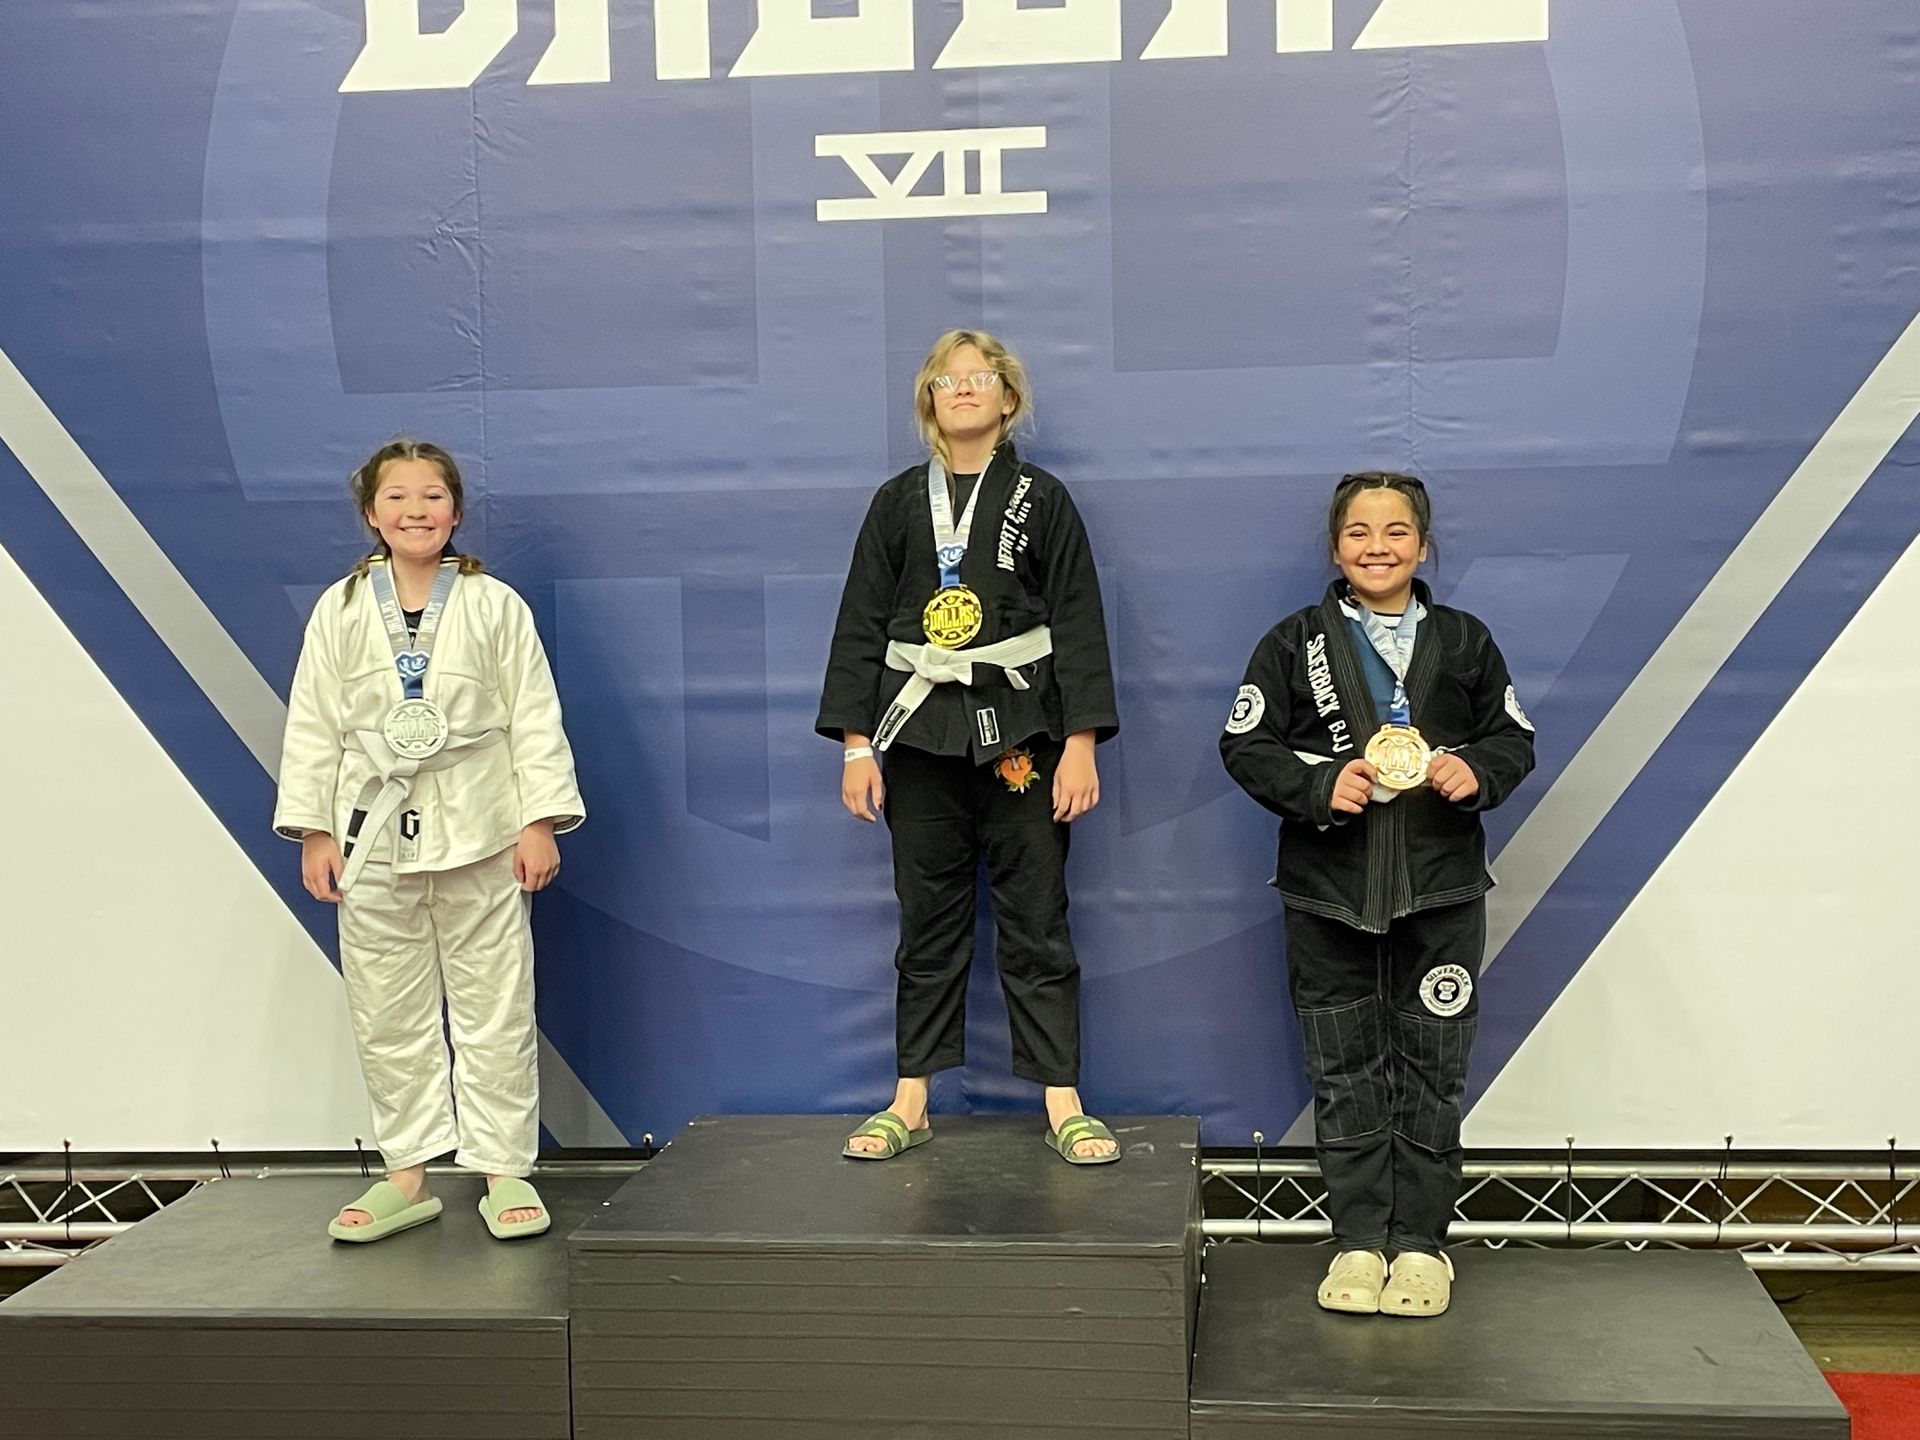 Mineral Wells Jiu Jitsu - 10 year old takes a gold medal in her first tournament.